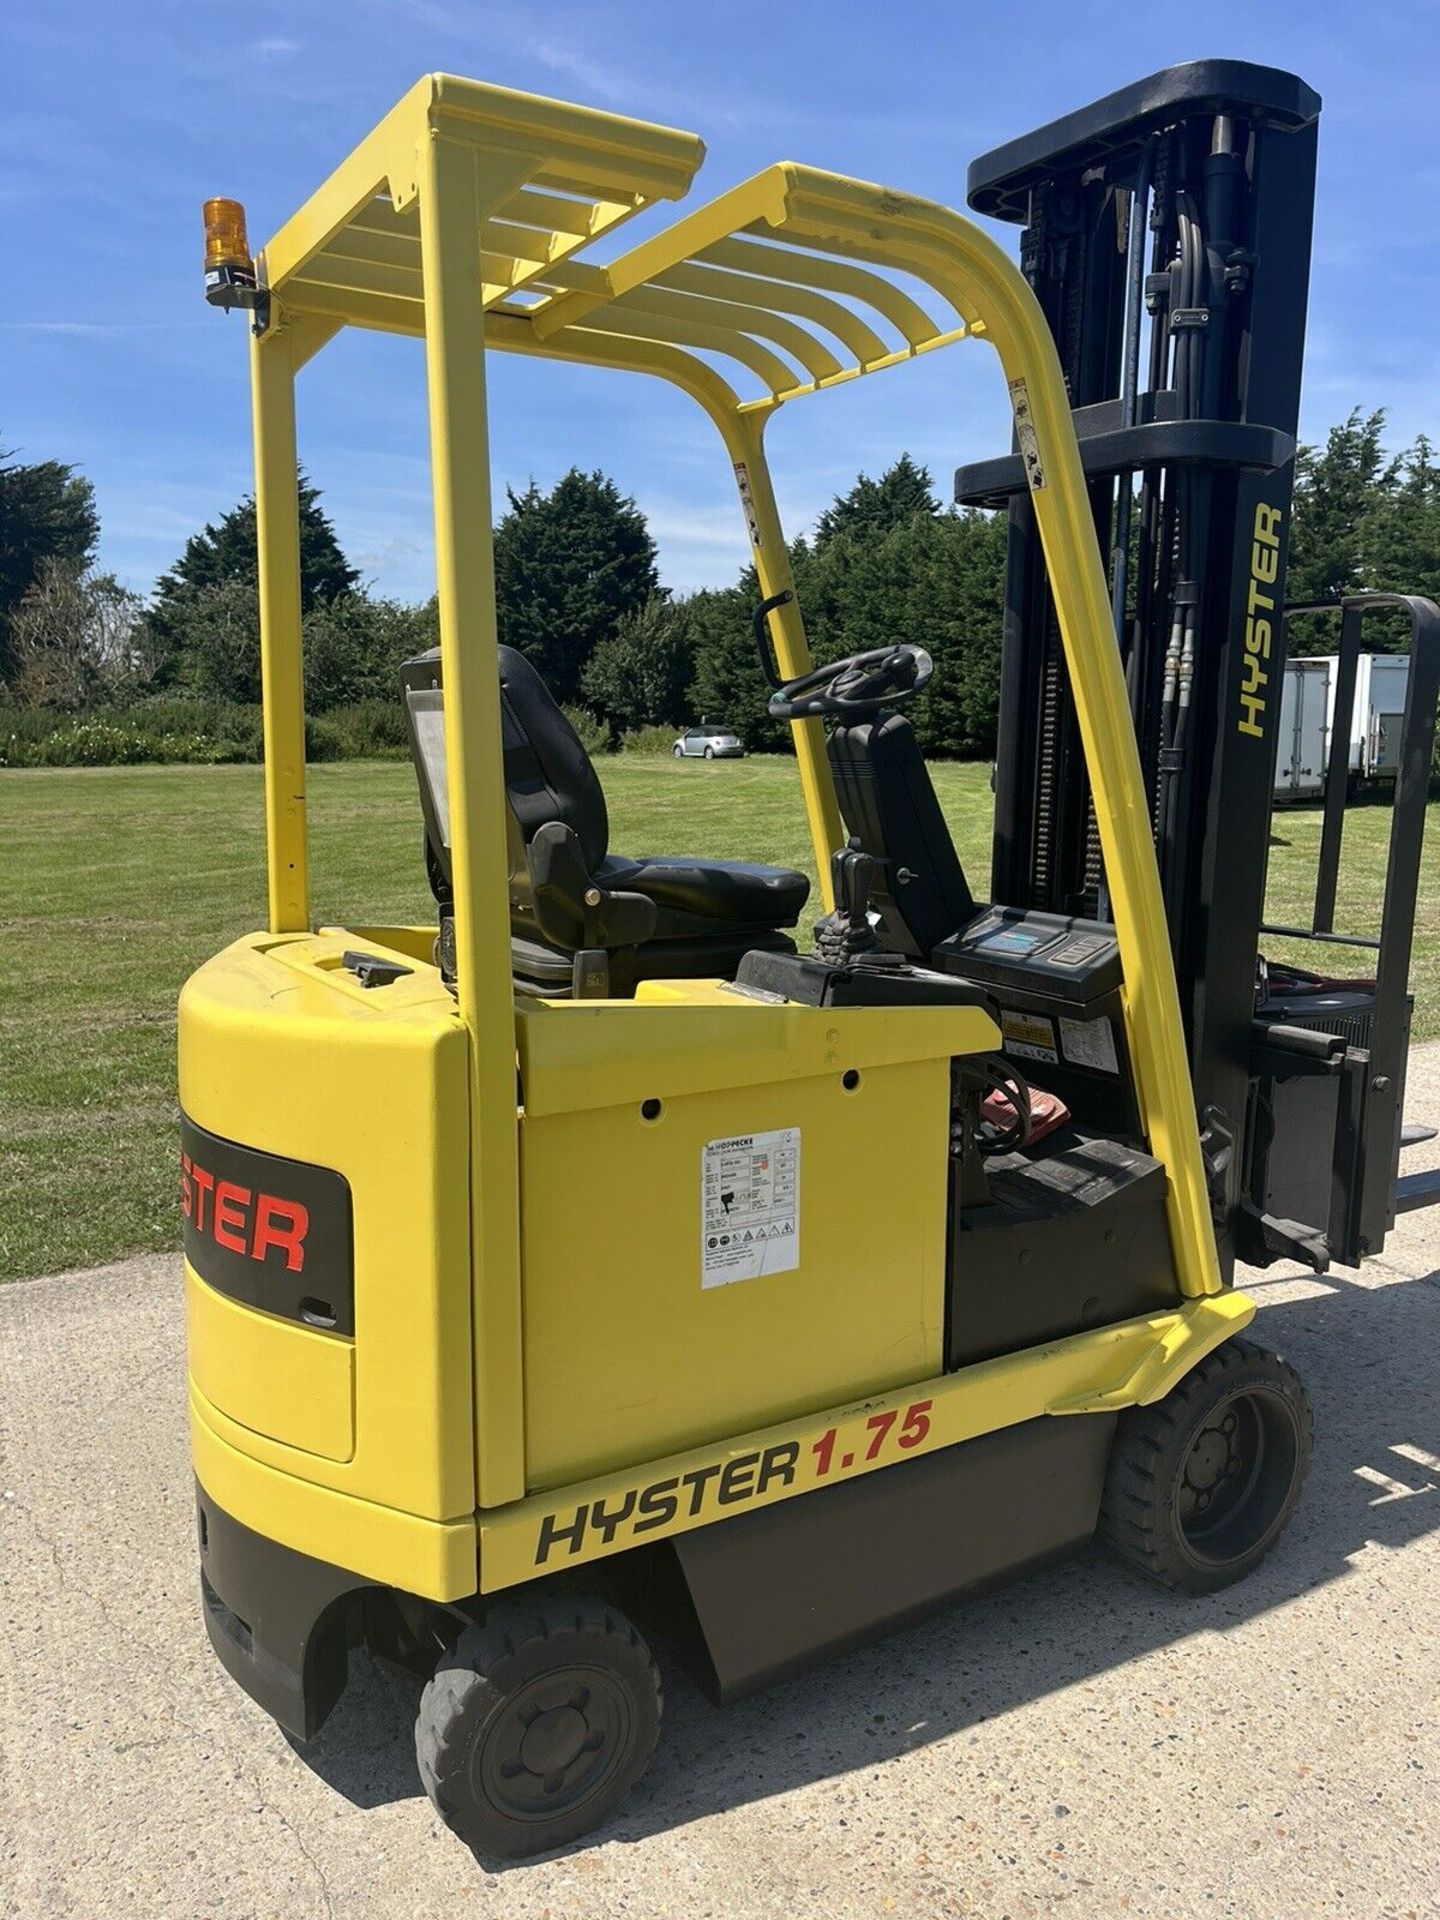 HYSTER, 1.75 Ton Electric Forklift Truck - Image 5 of 6